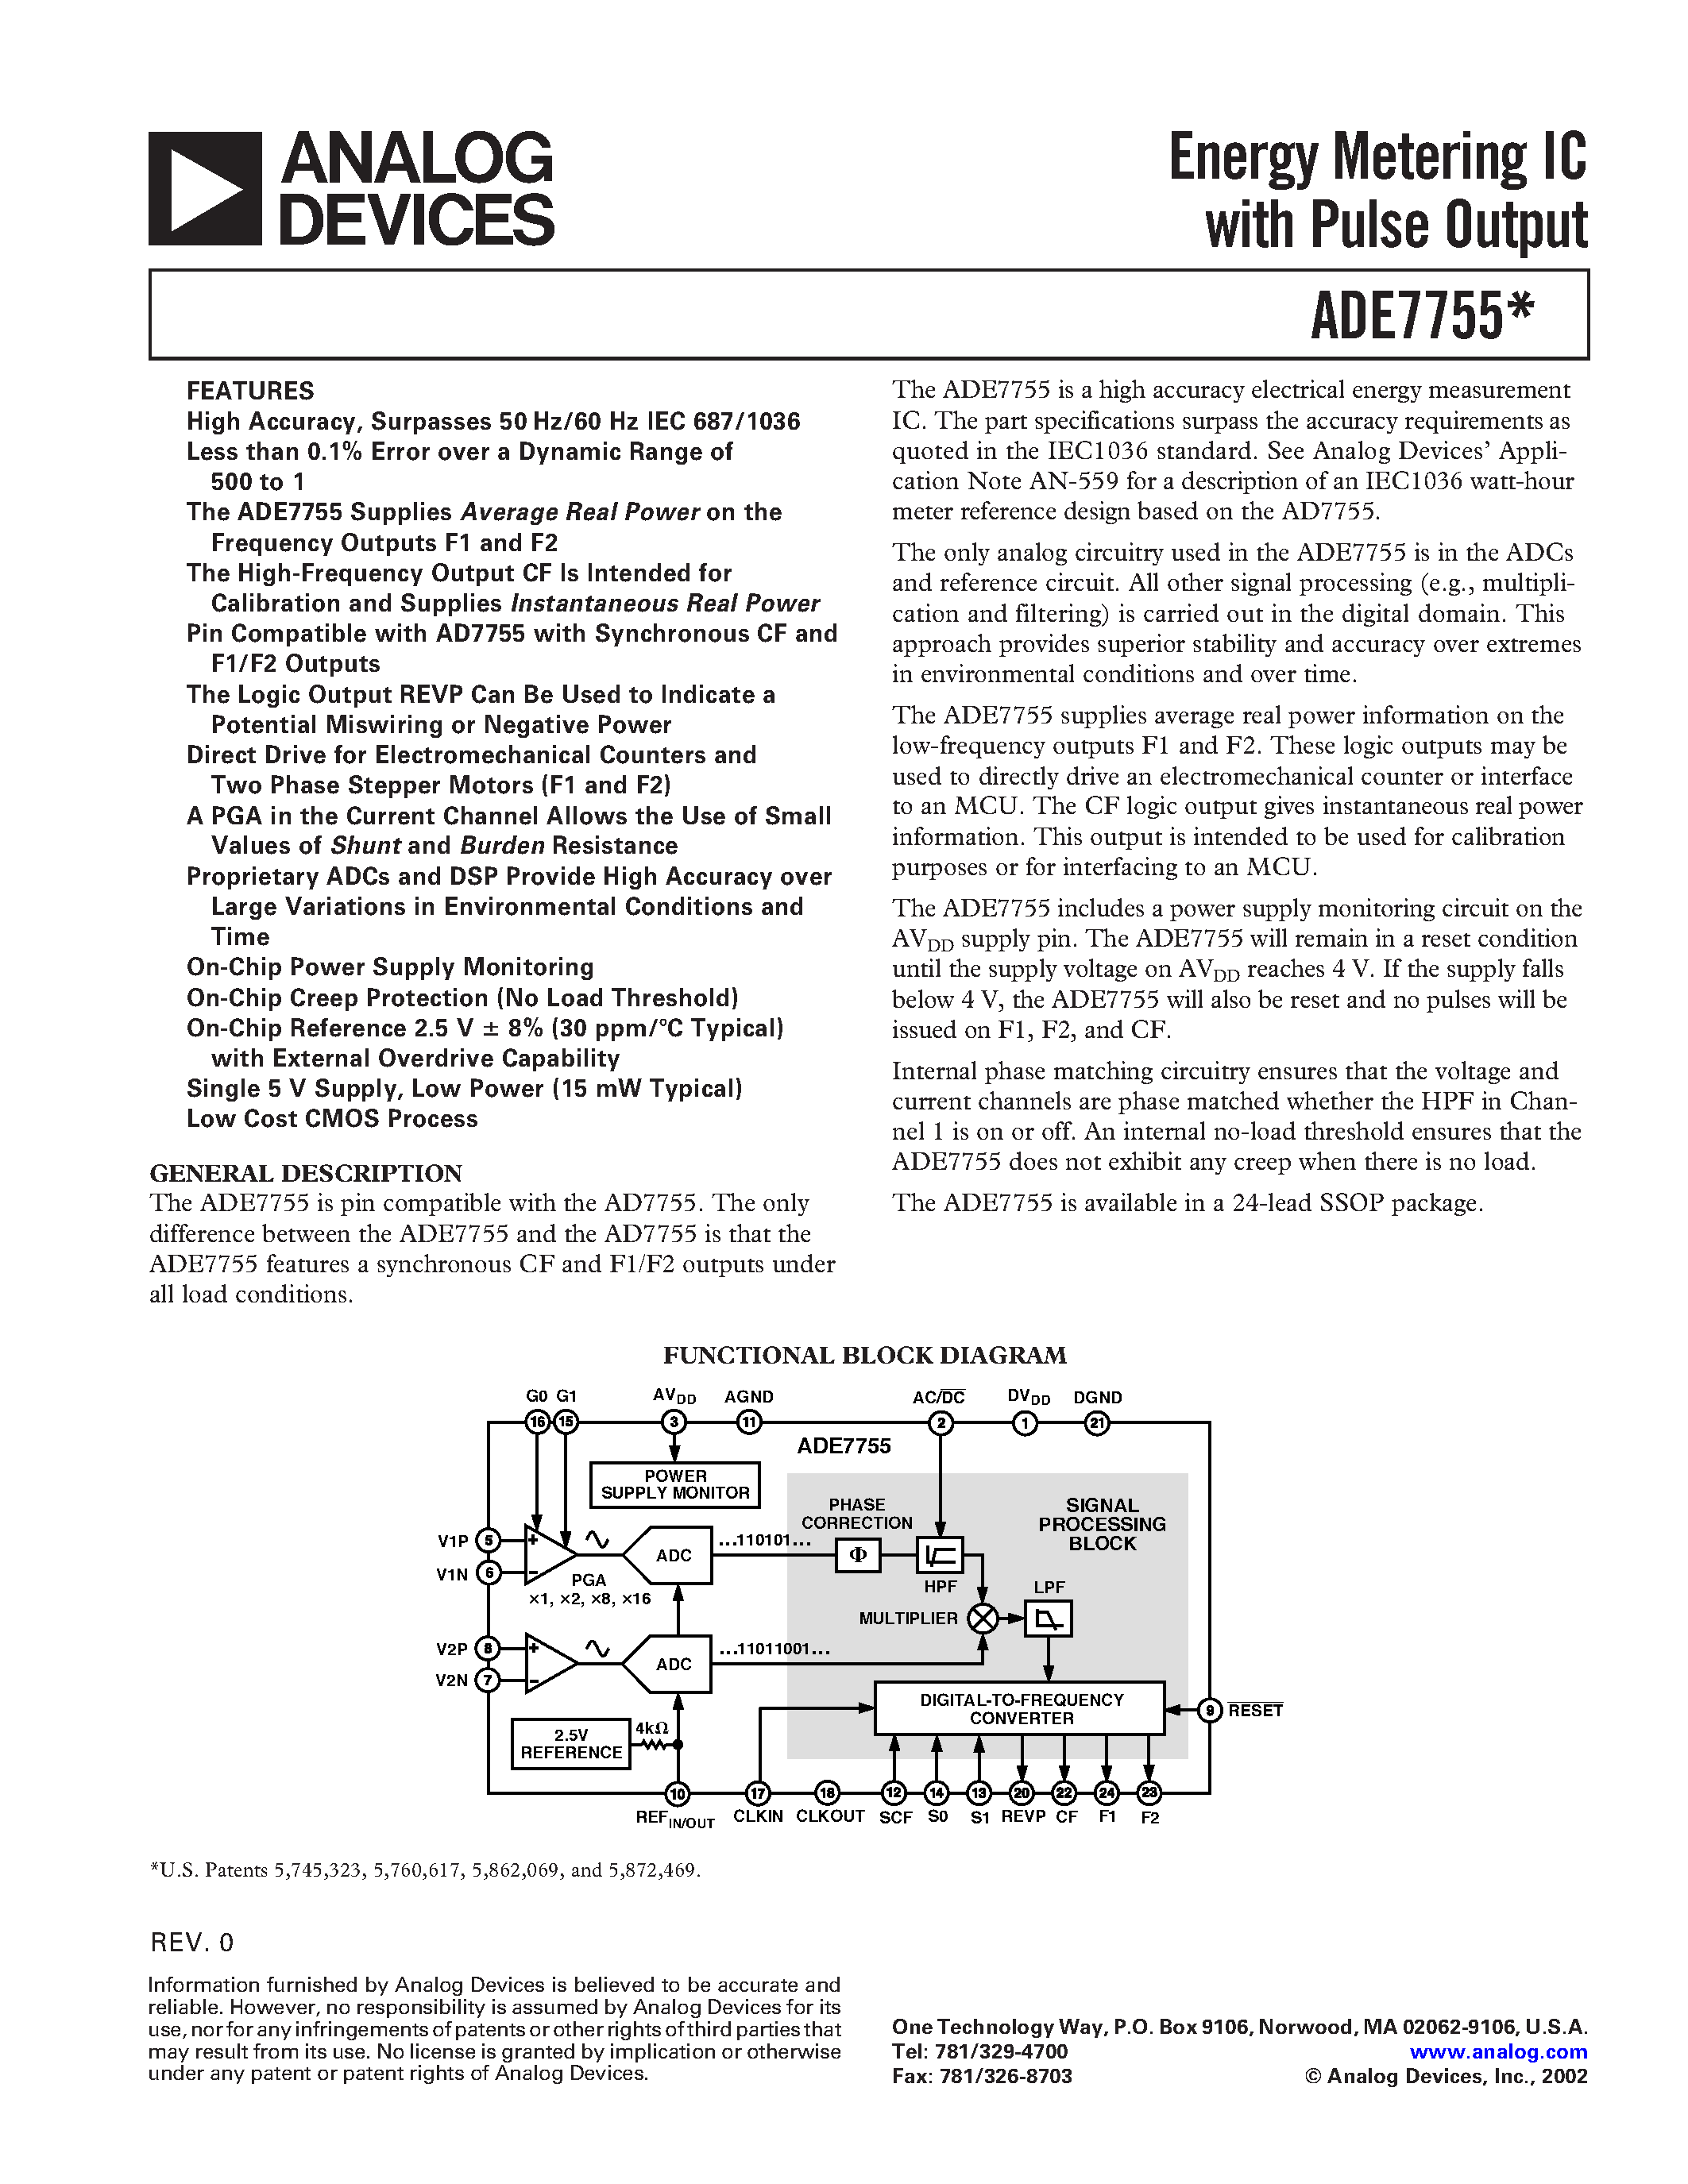 Даташит ADE7755ARS - Energy Metering IC with Pulse Output страница 1